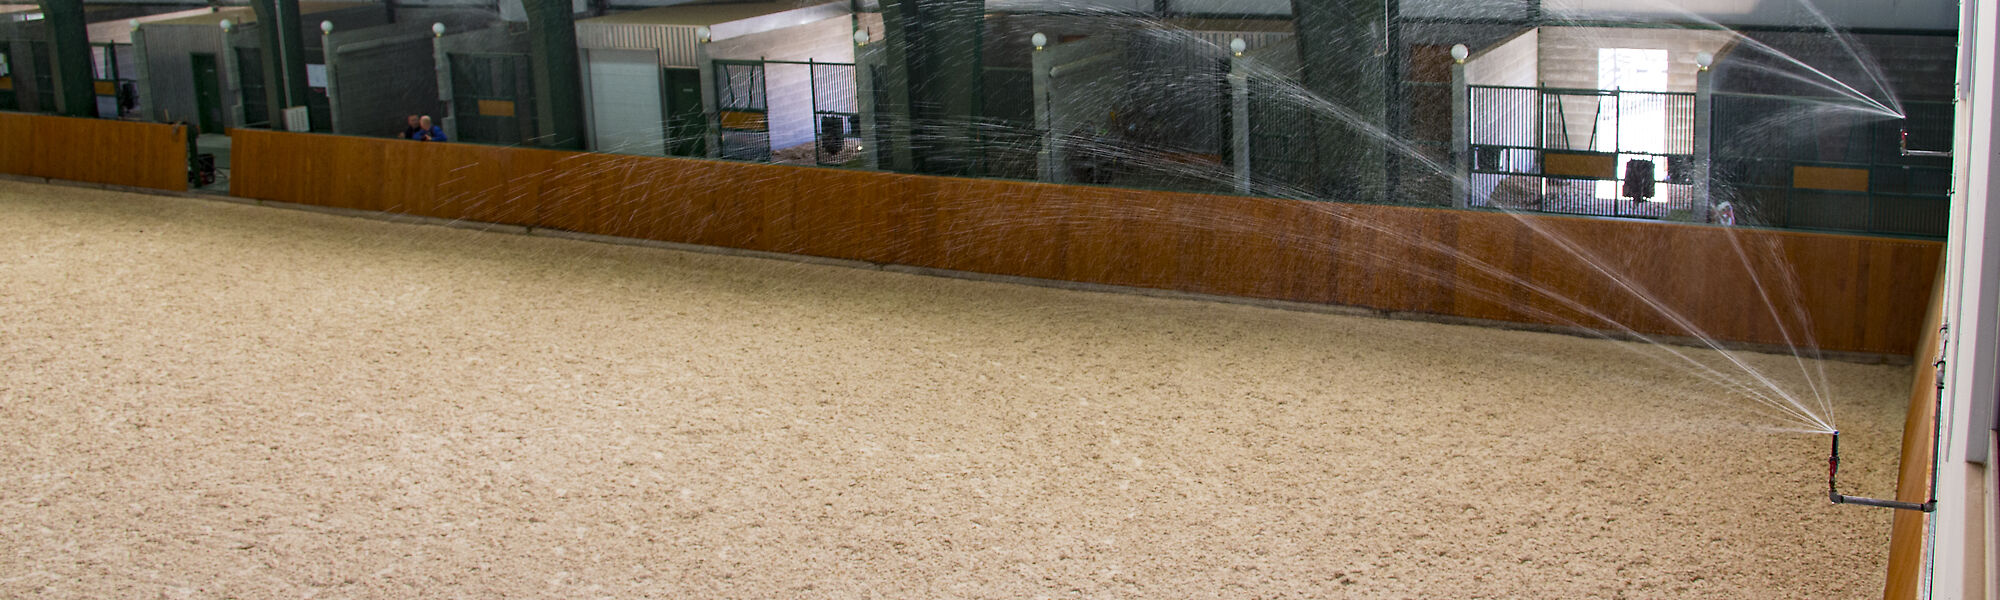 Nelson Irrigation MP Rotator sprinkler in indoor equestrian riding arena. 